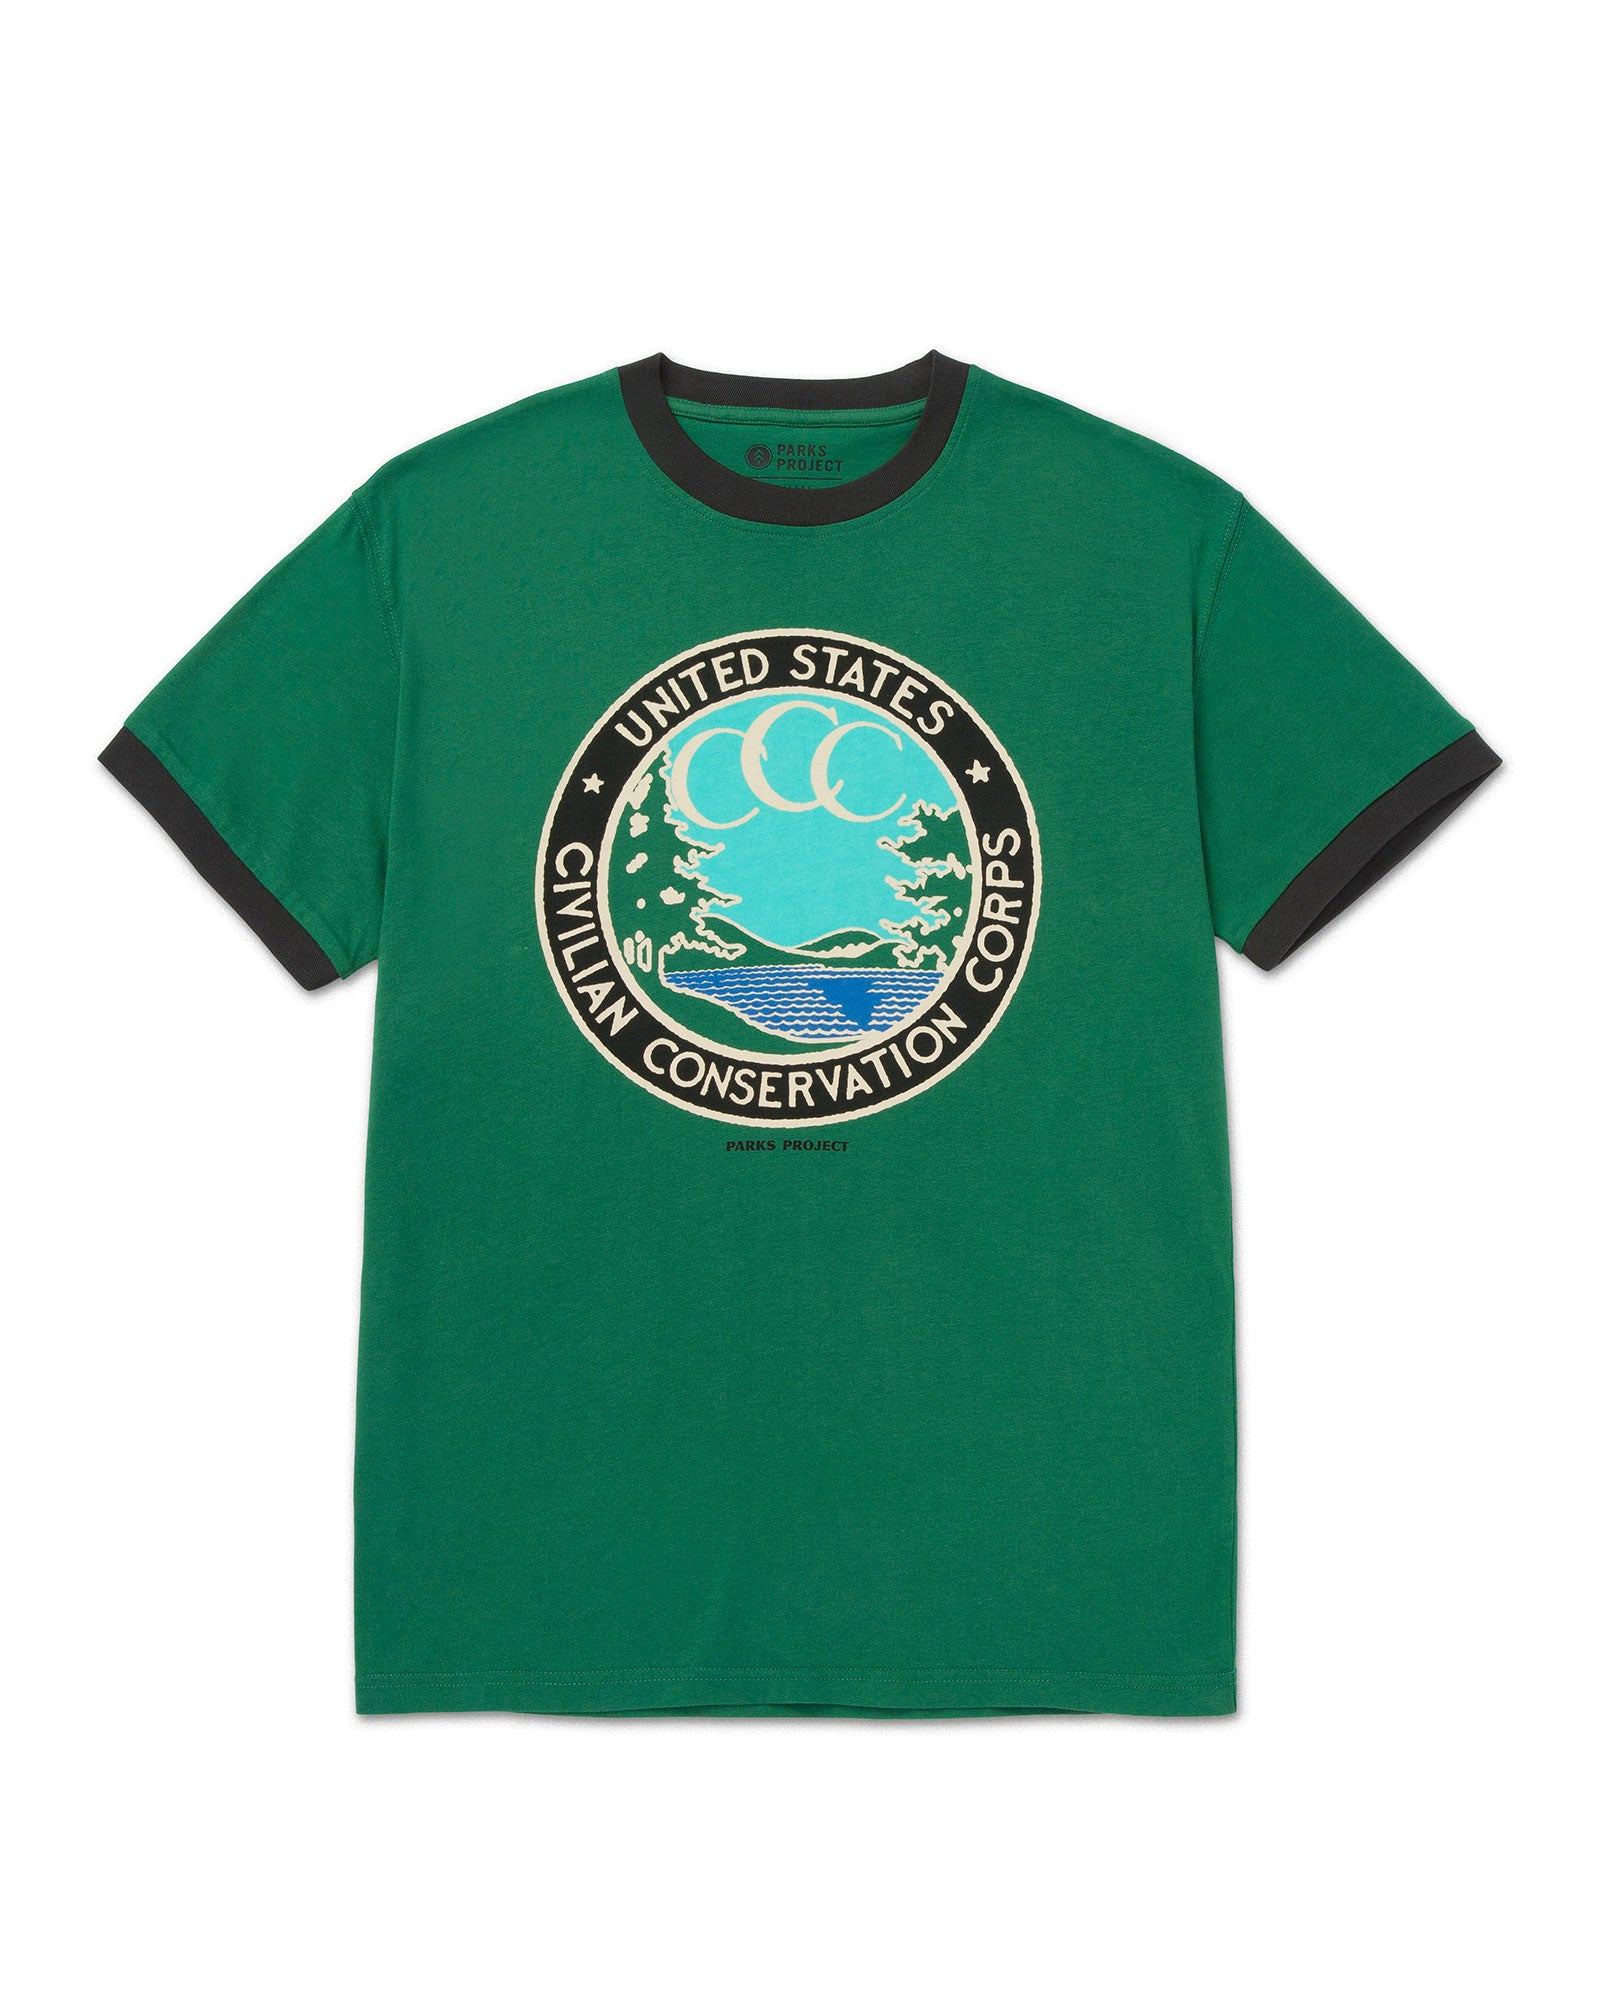 Shop Civilian Conservation Corps Ringer Tee Inspired by National Parks ...